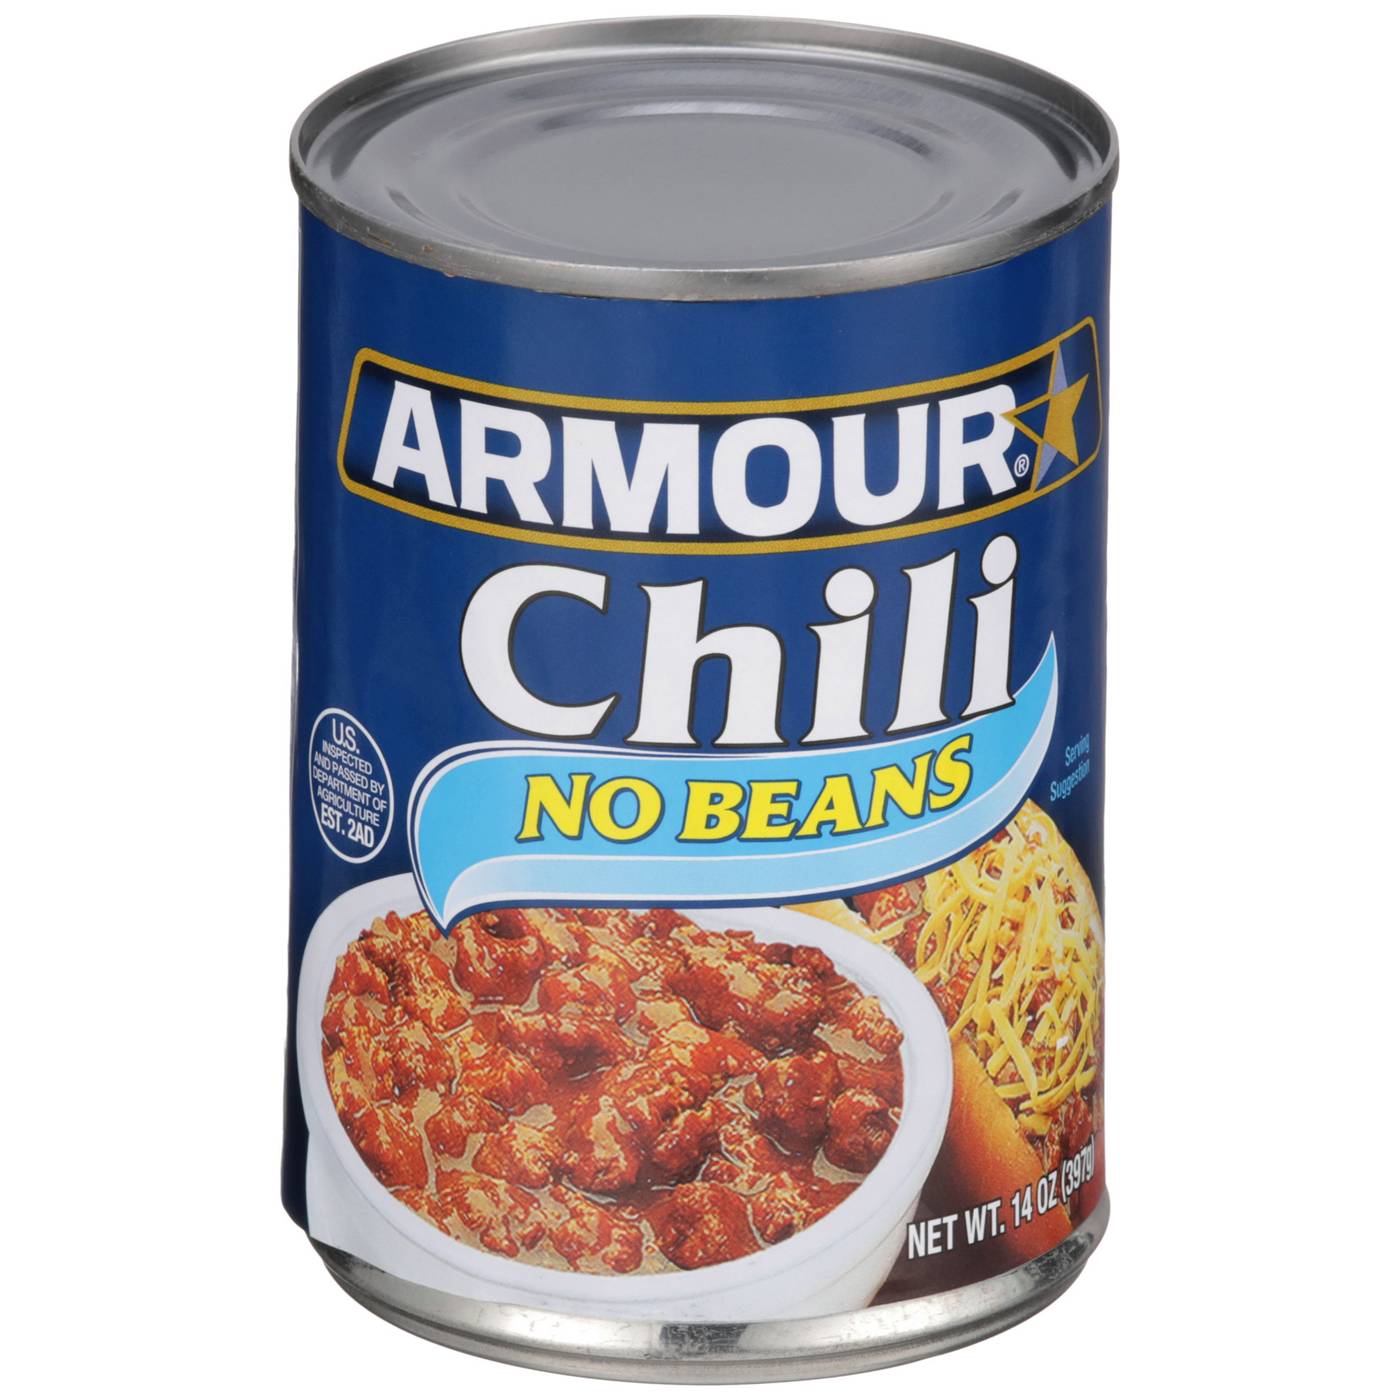 Armour Chili with No Beans Canned Chili; image 1 of 3